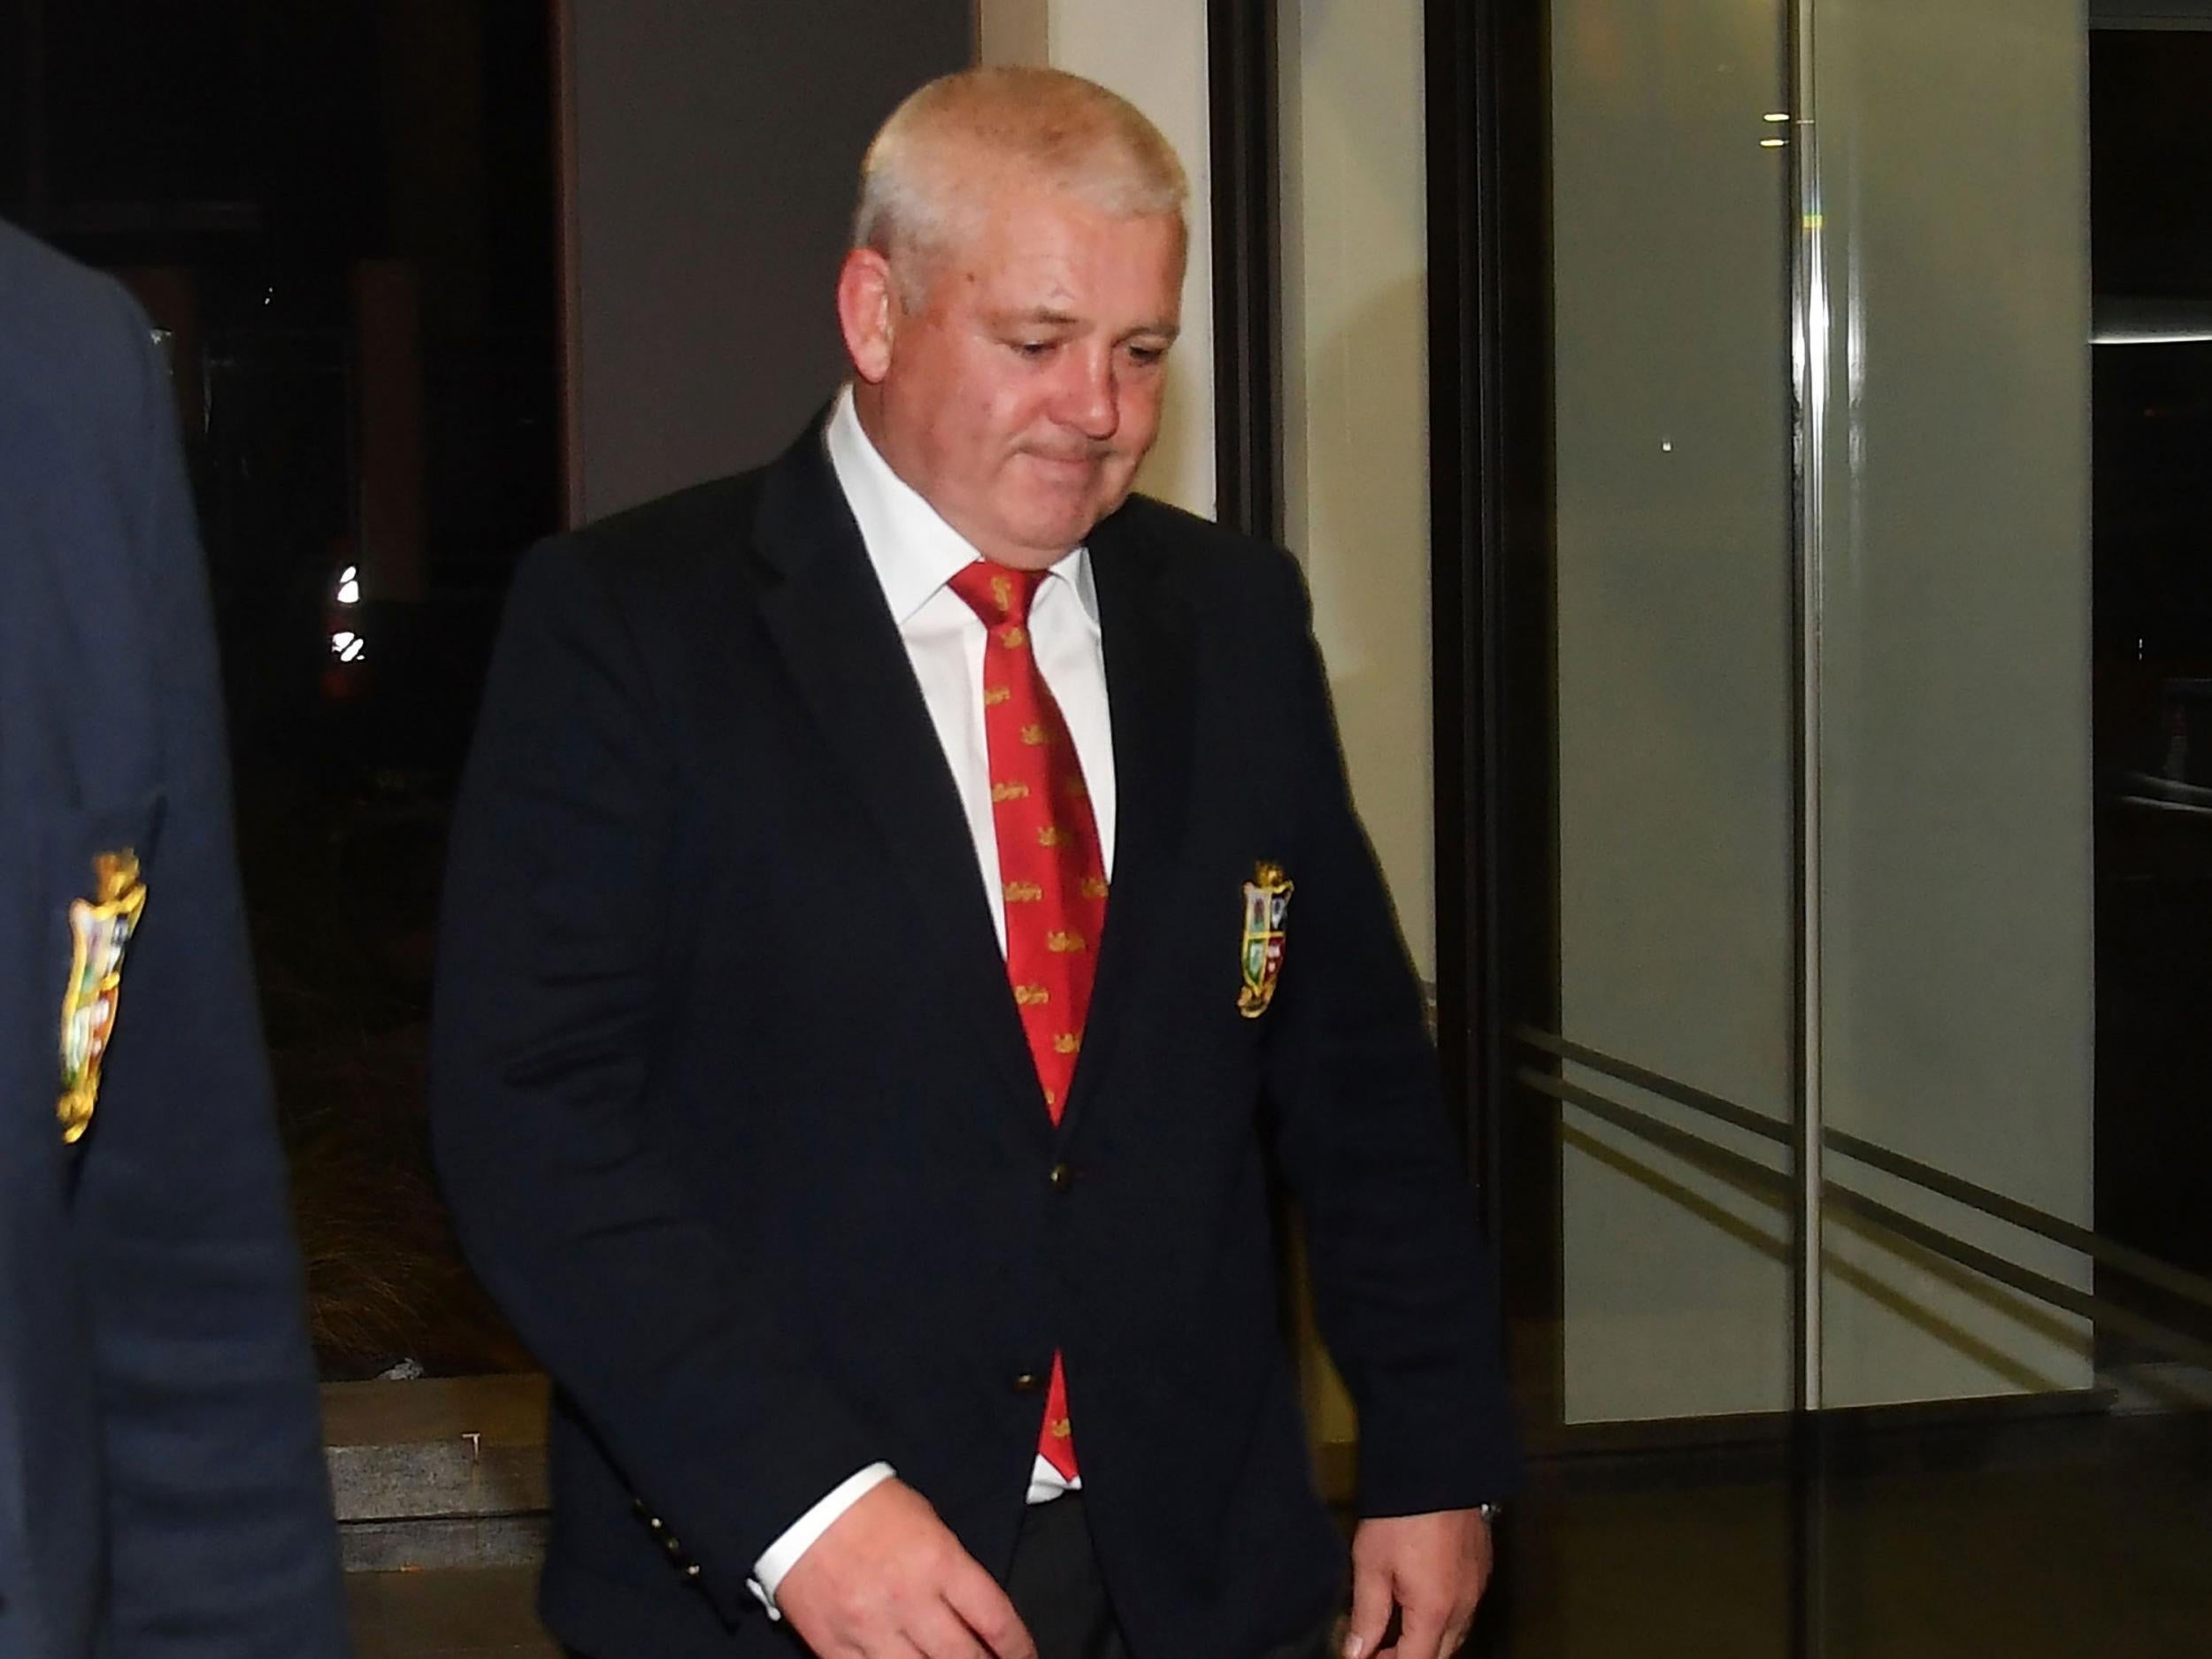 Warren Gatland believes the only reason the Lions haven't wrapped up the series yet is because of their penalty count